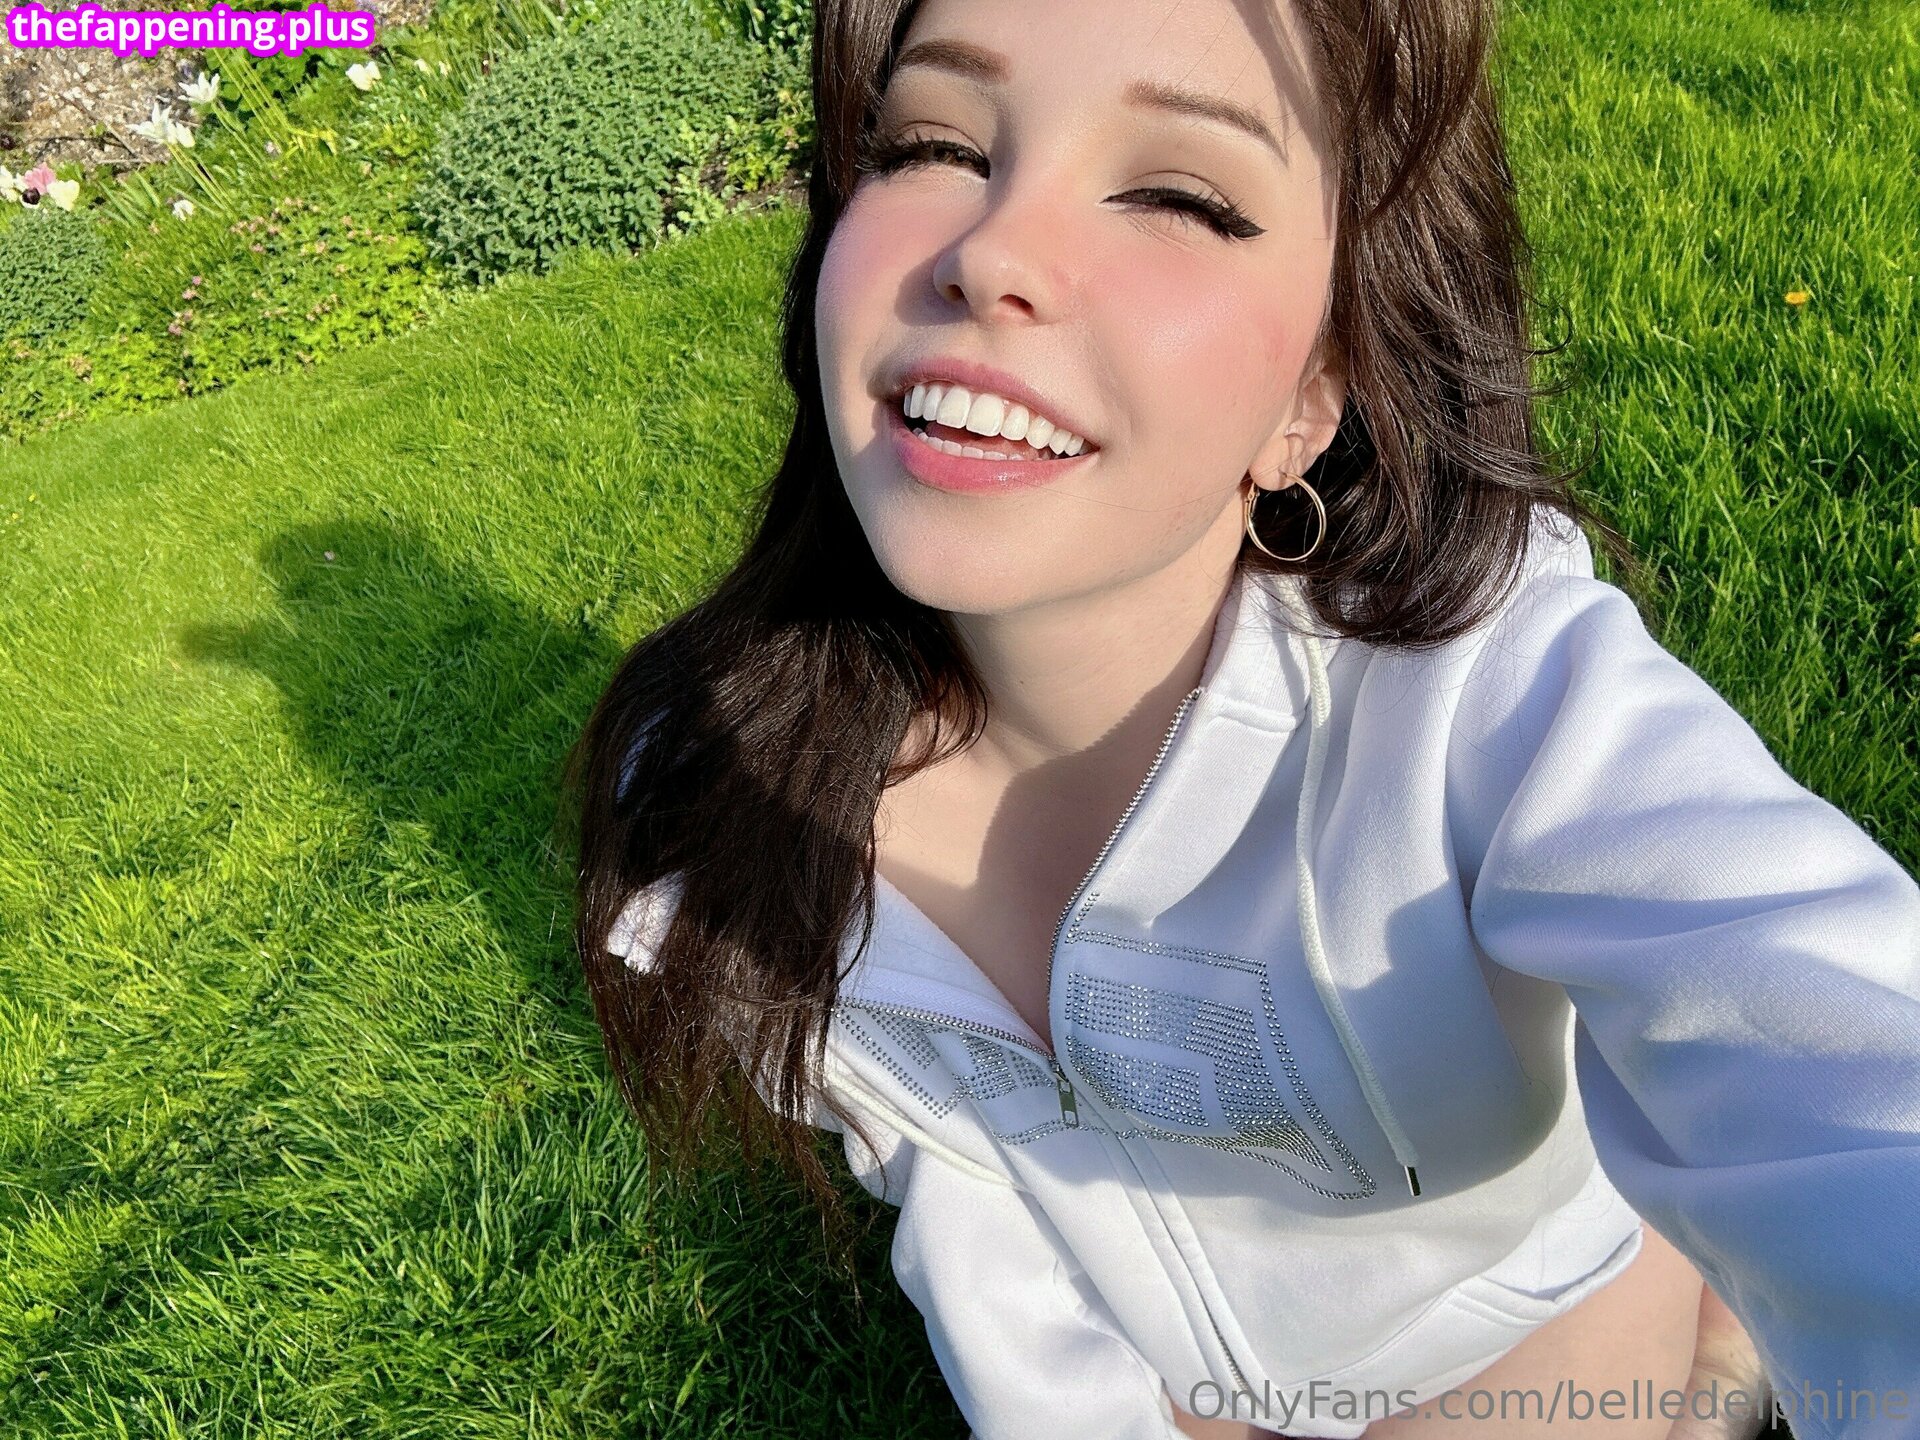 Belle Delphine Belledelphine Belledelphine Bunnydelphine Nude Onlyfans Photo 2404 The 